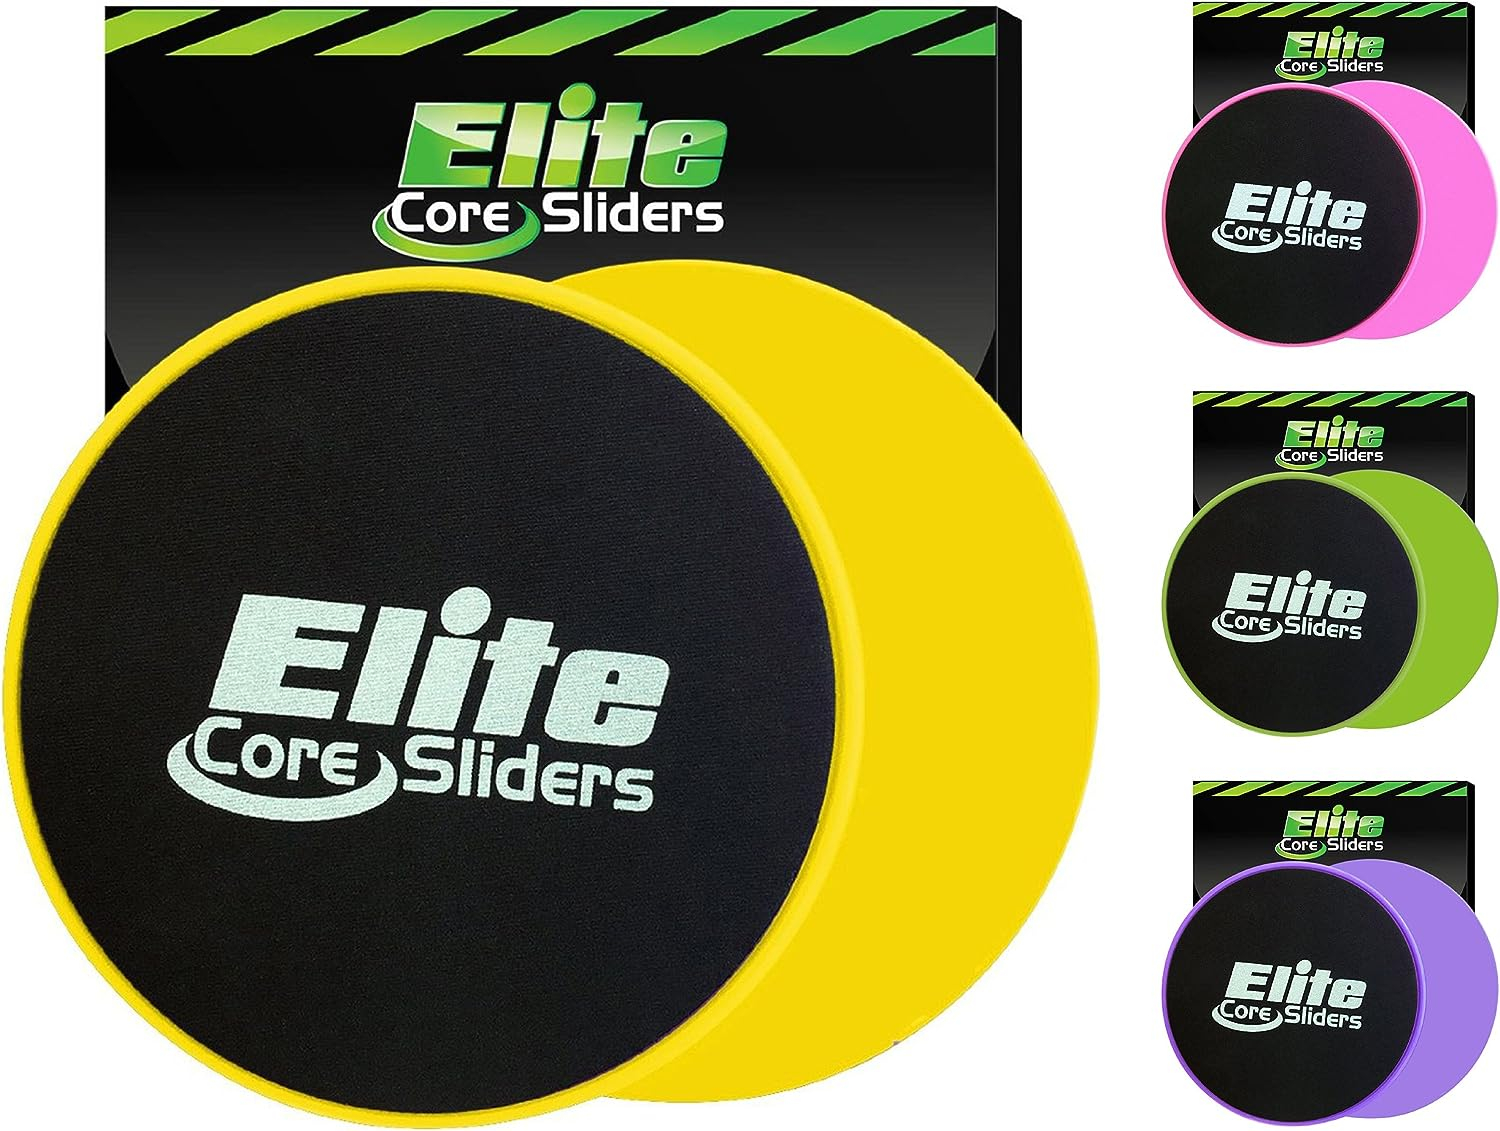 Elite Sportz Core Sliders for Working Out - Pack of 2 Compact, Dual Sided Gliding Discs for Full Body Workout on Carpet or Hardwood Floor - Fitness  Home Exercise Equipment - Small Gift for Athletes